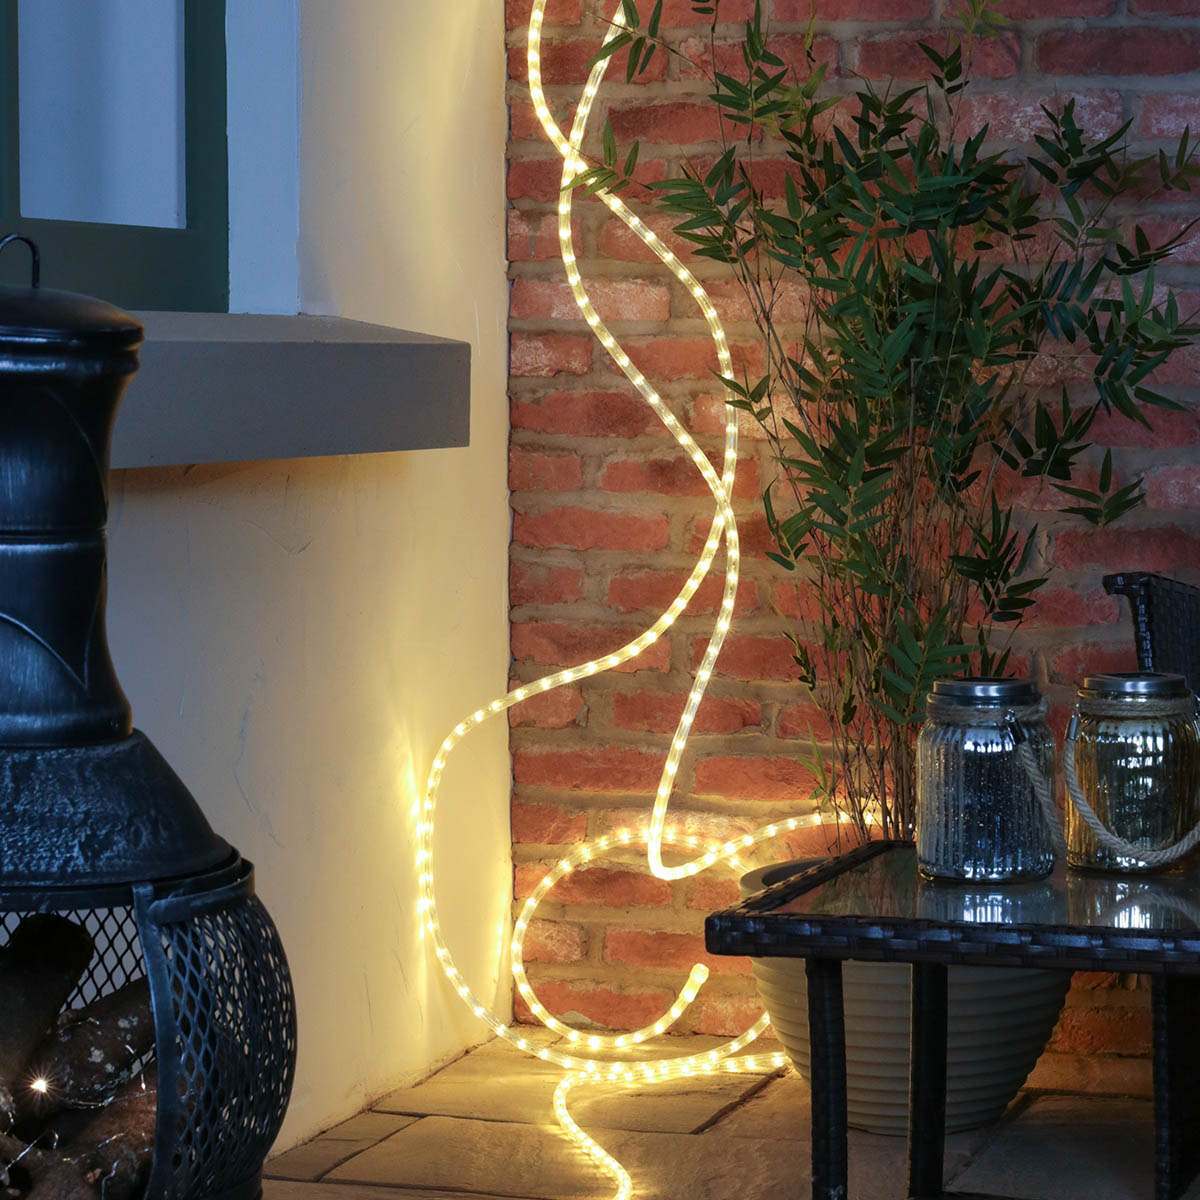 LED Rope Light 2 Wire Flexible Outdoor Xmas Décor Custom Length Warm White 